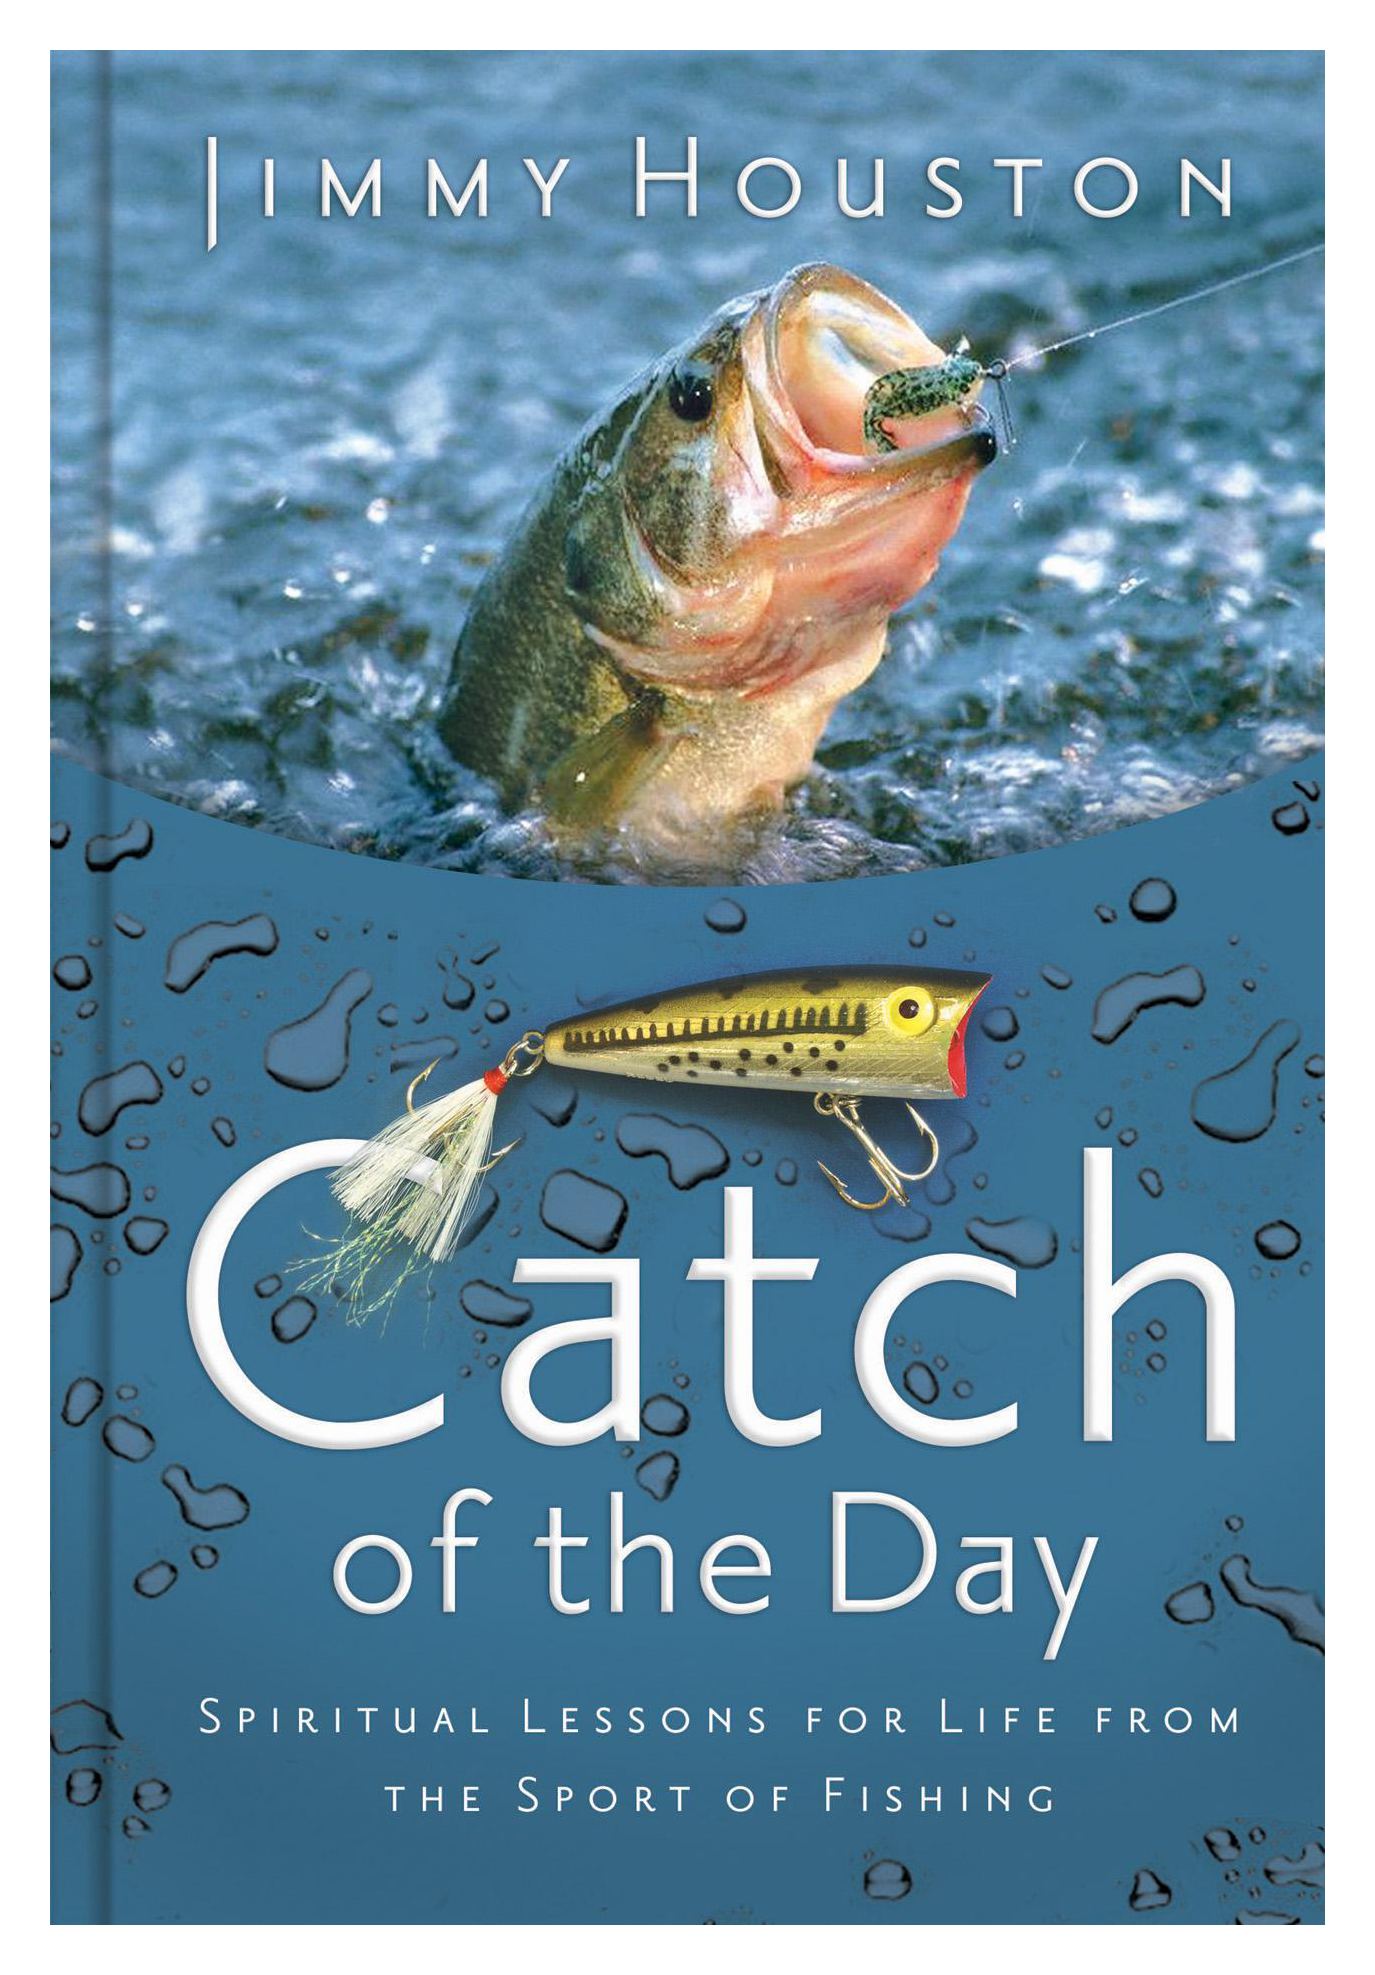 Catch of the Day Book by Jimmy Houston